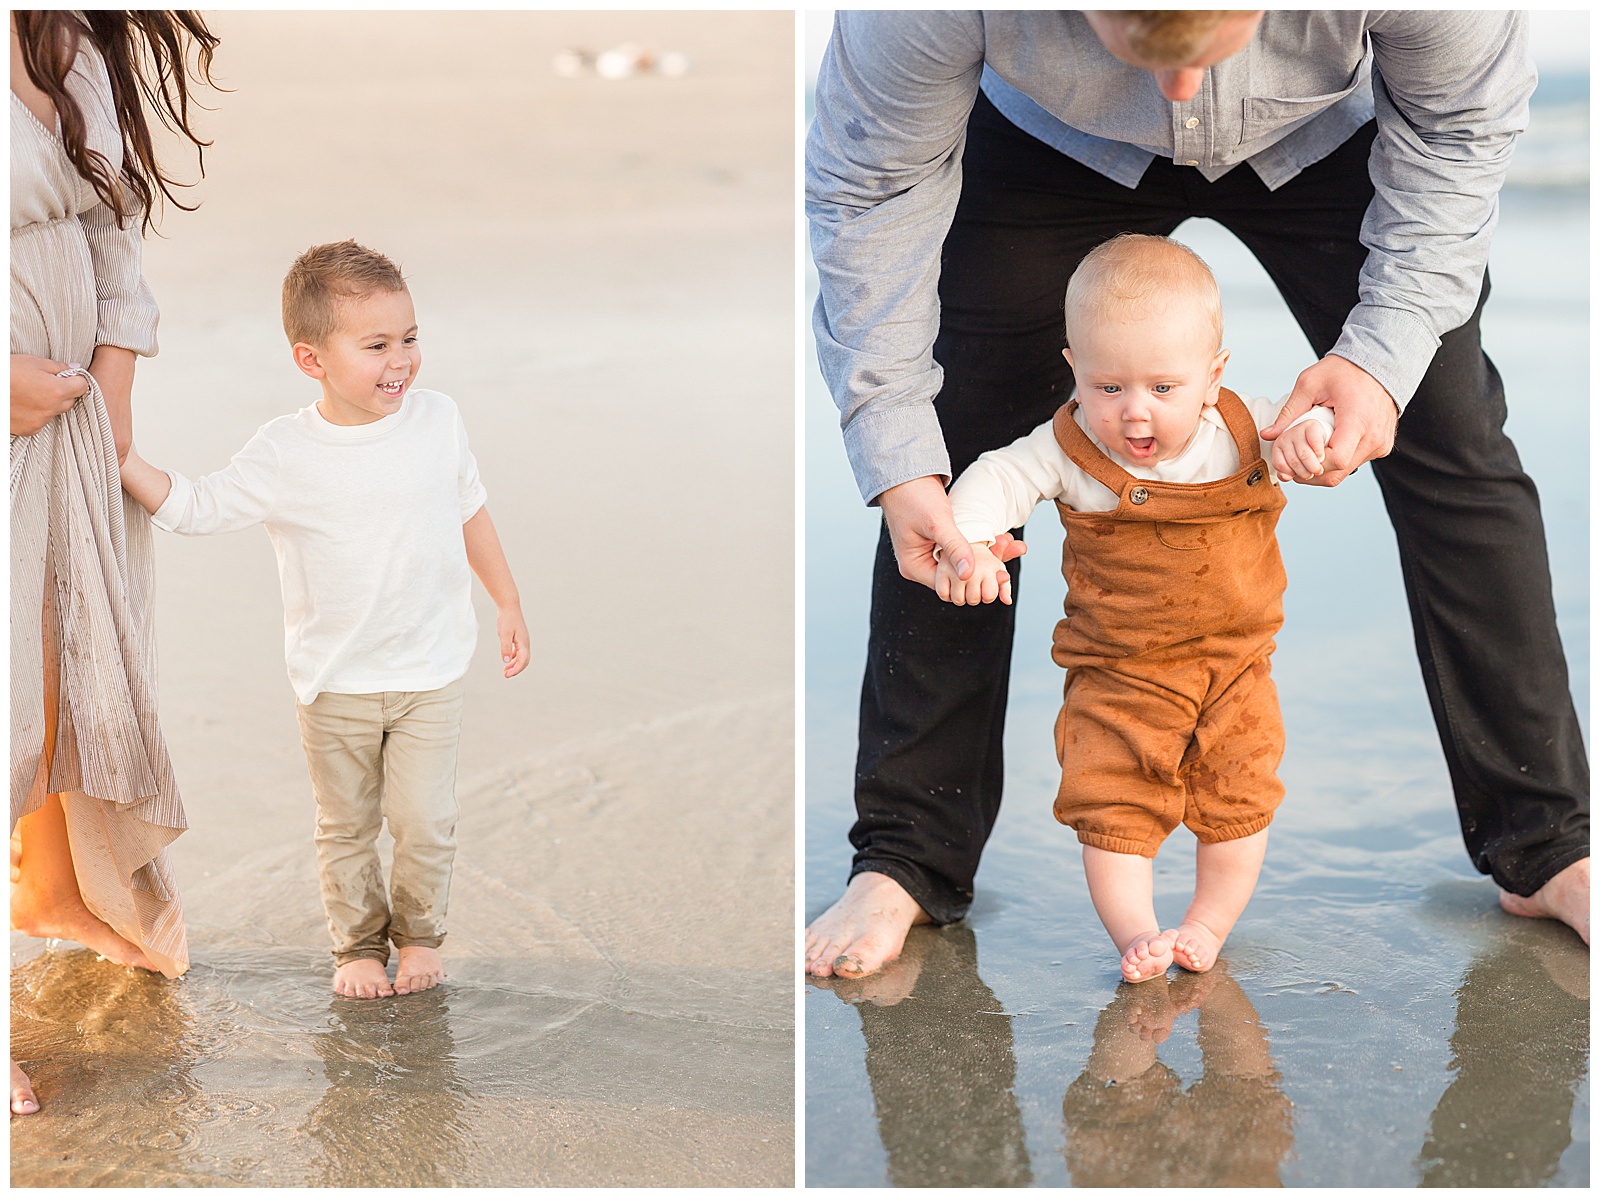 Two brothers share an individual moments in the ocean waters as they put their toes in the water in Charleston, SC.